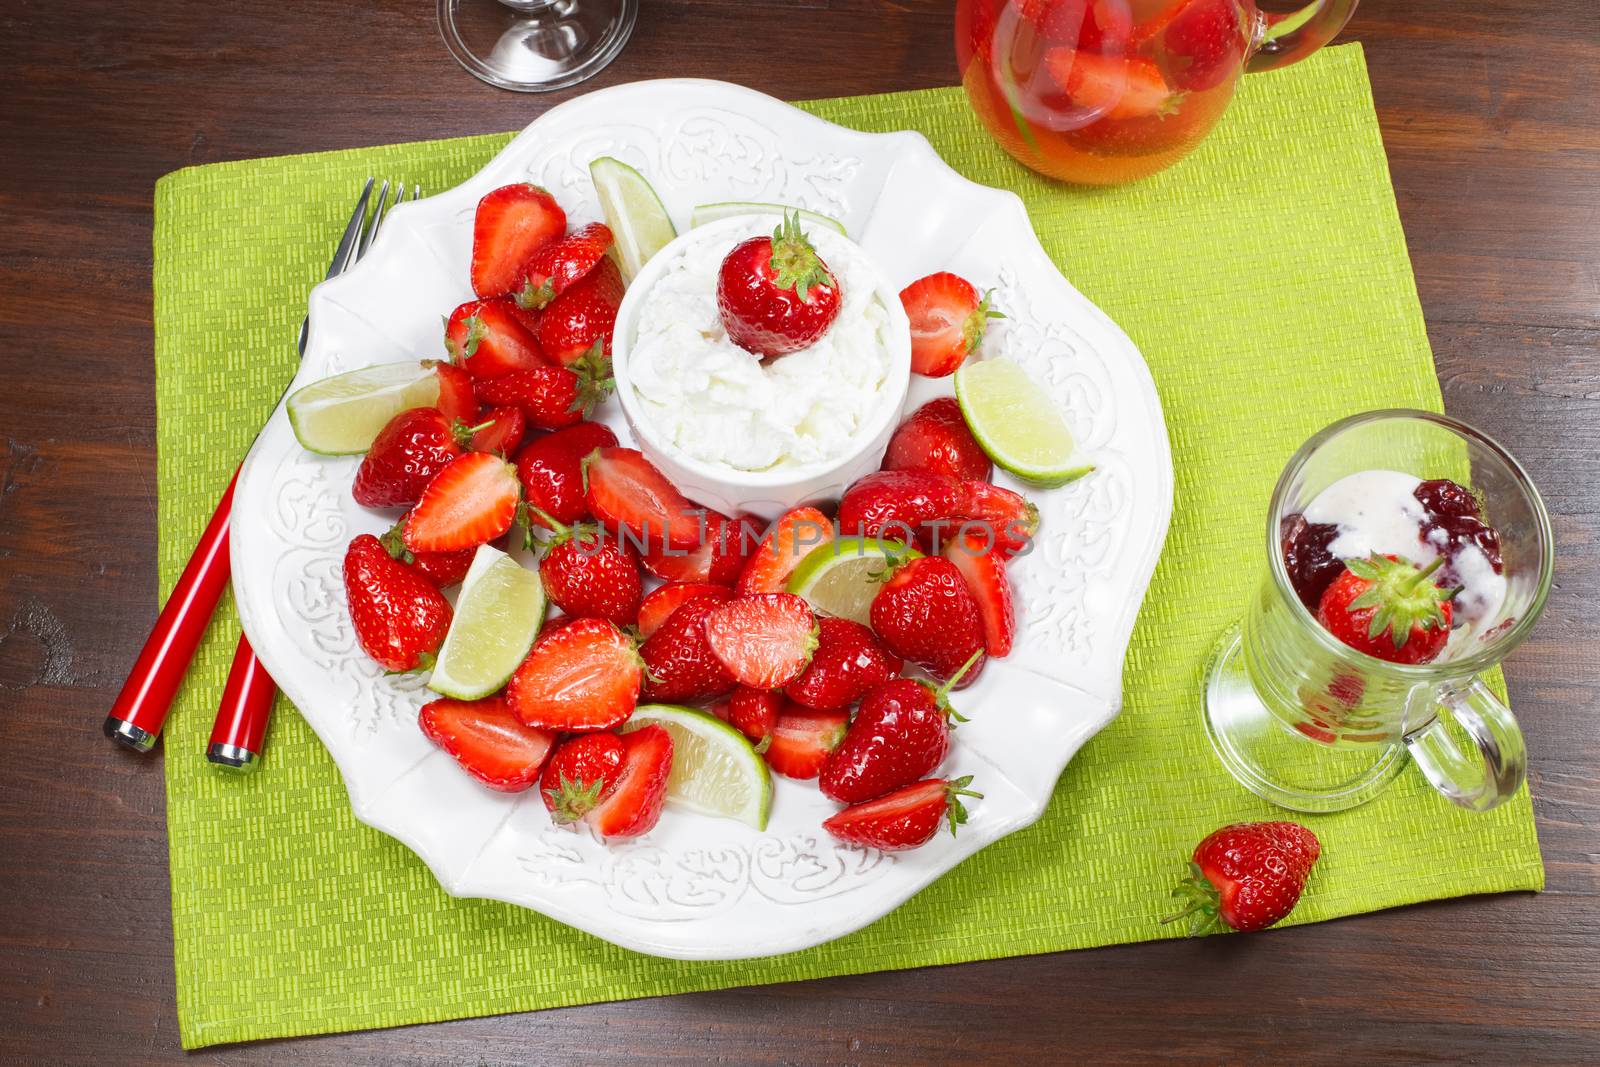 Macerated strawberries with mascarpone whipped cream by Slast20